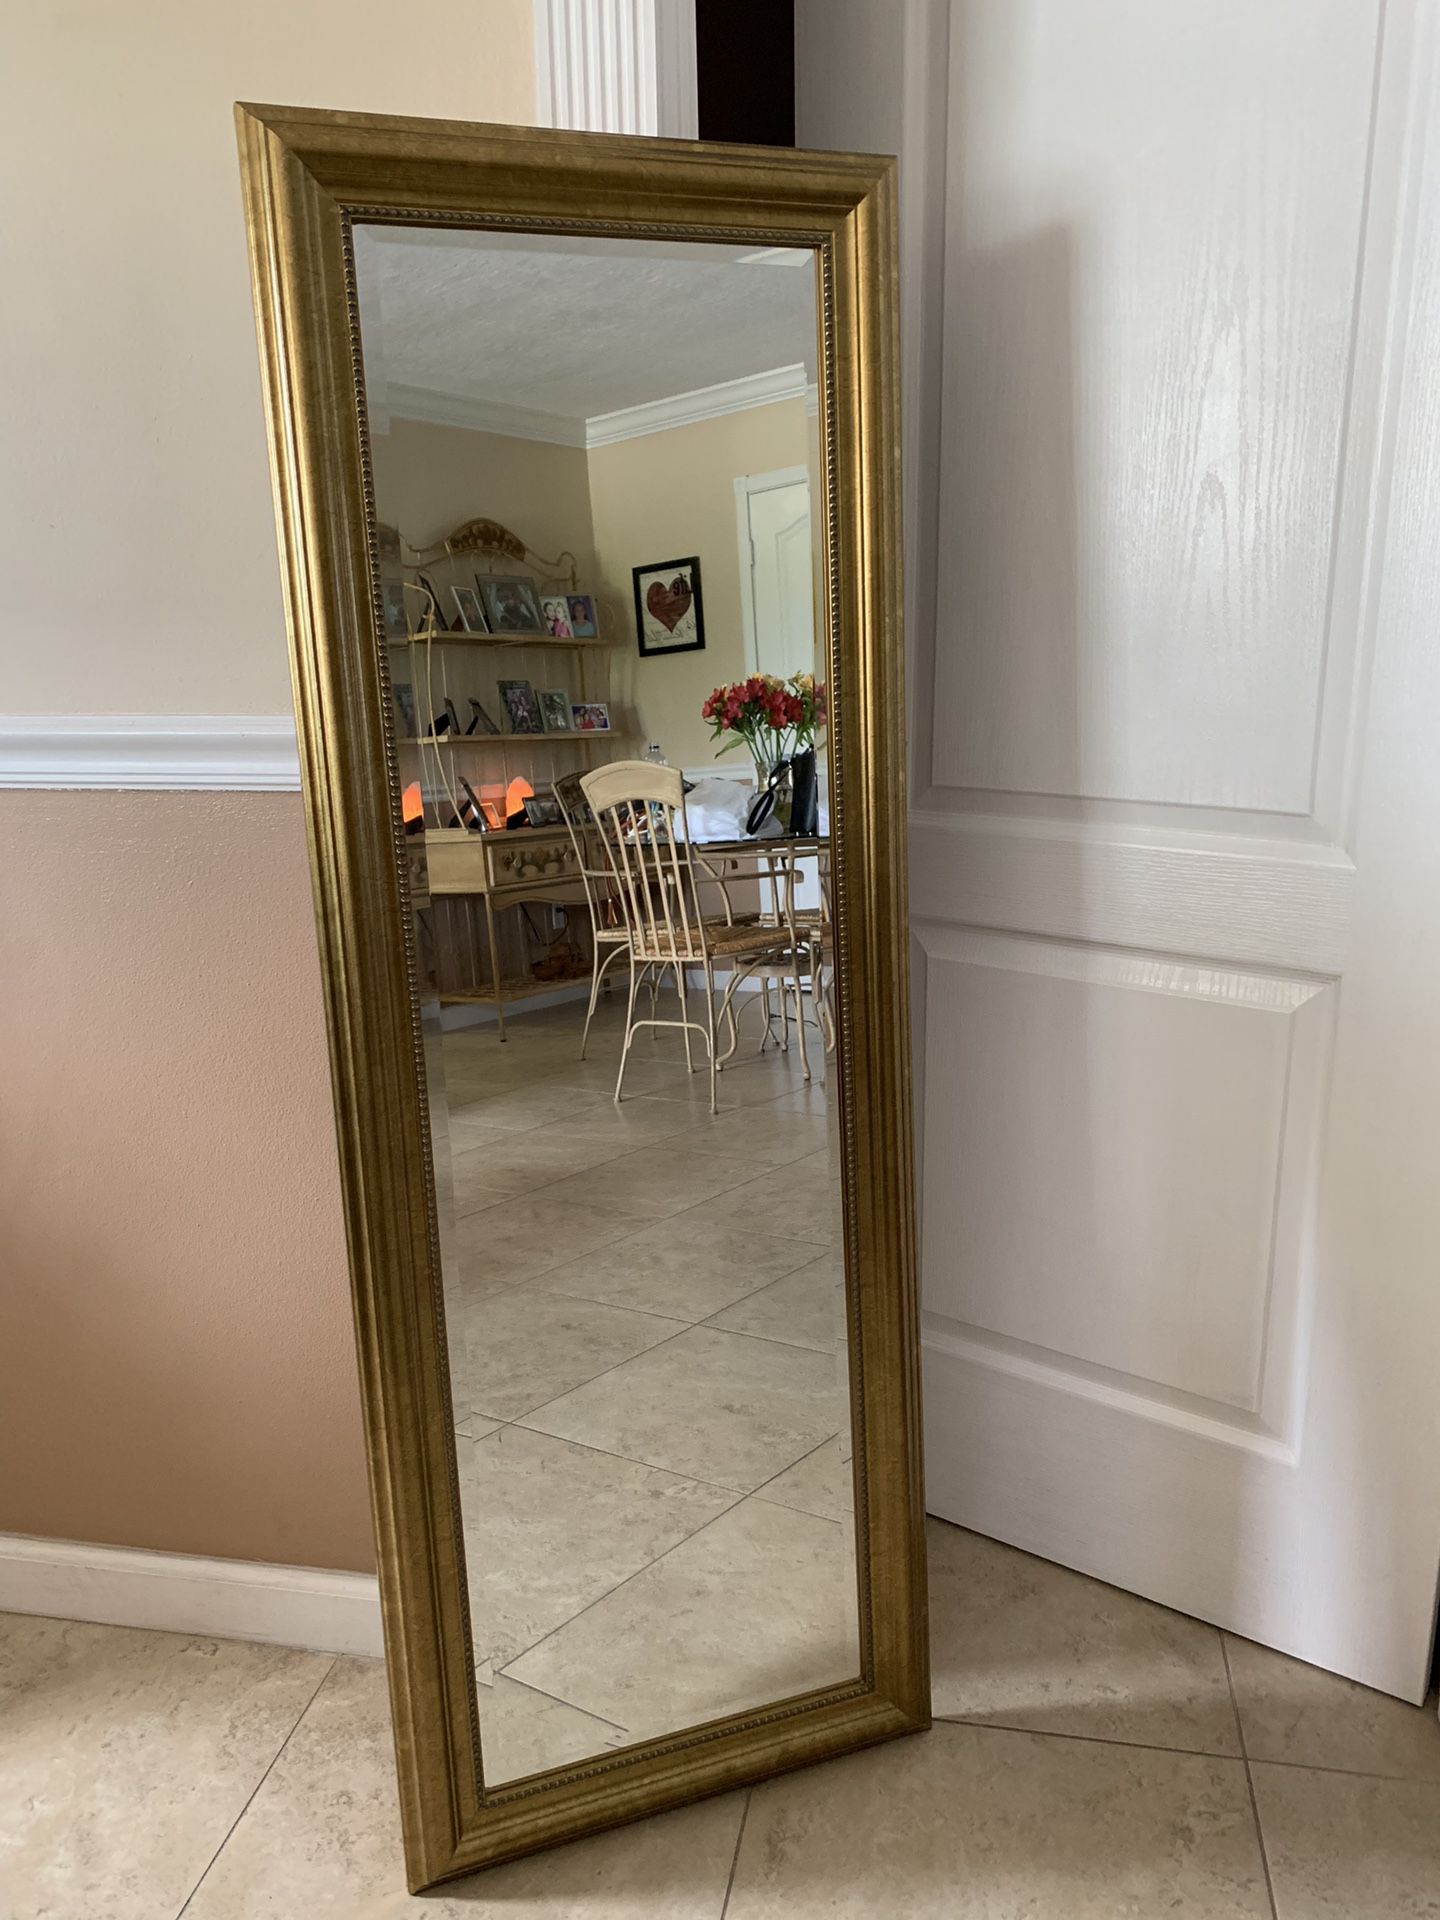 Beautifully detailed gold mirror